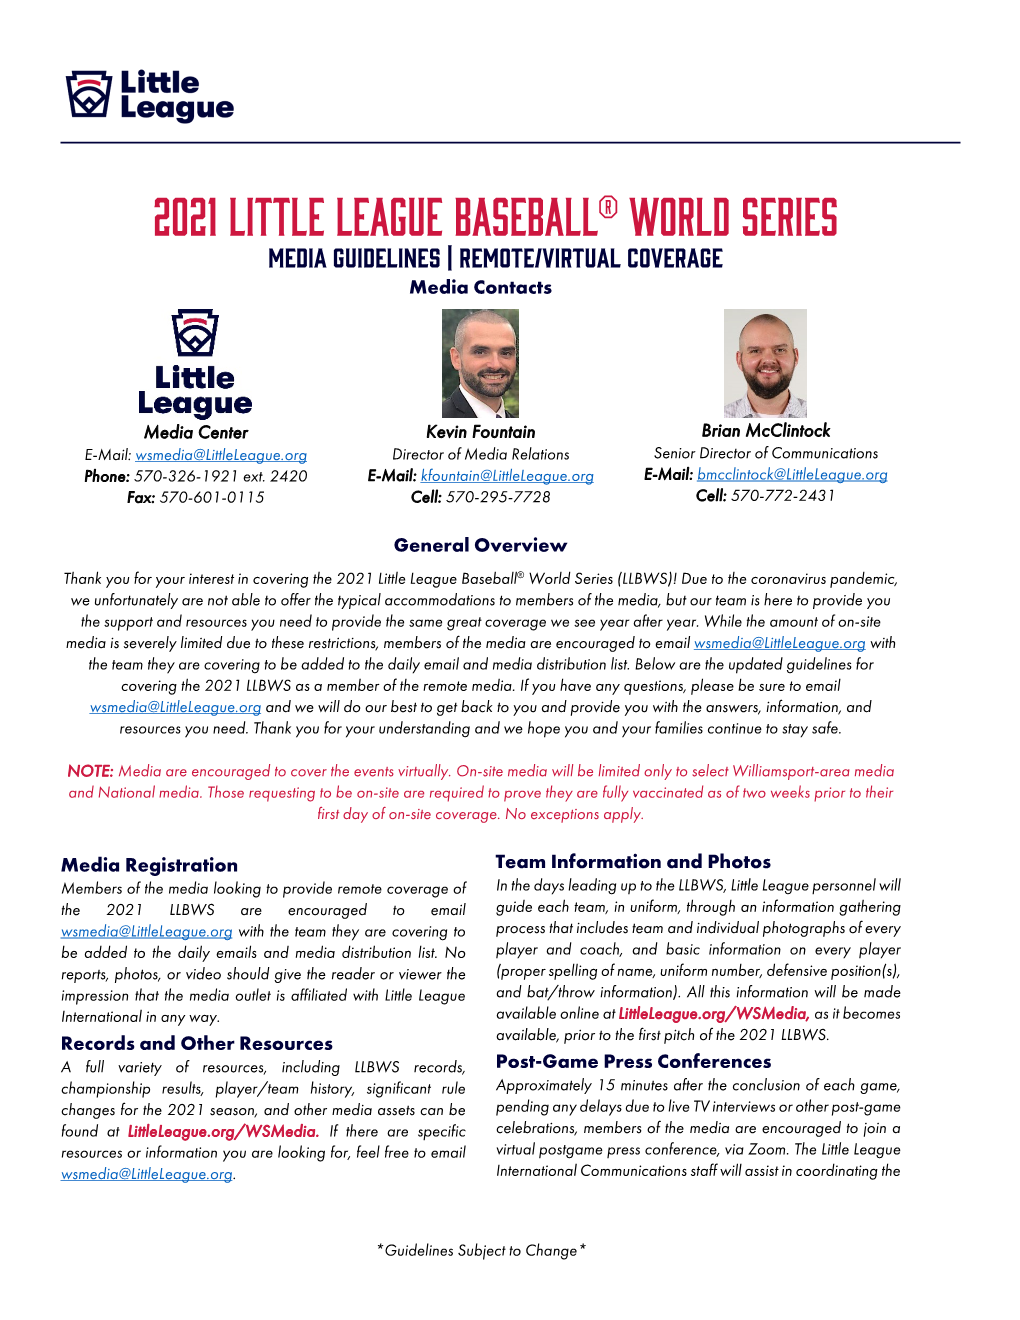 2021 Little League Baseball® World Series Media Guidelines | Remote/Virtual Coverage Media Contacts